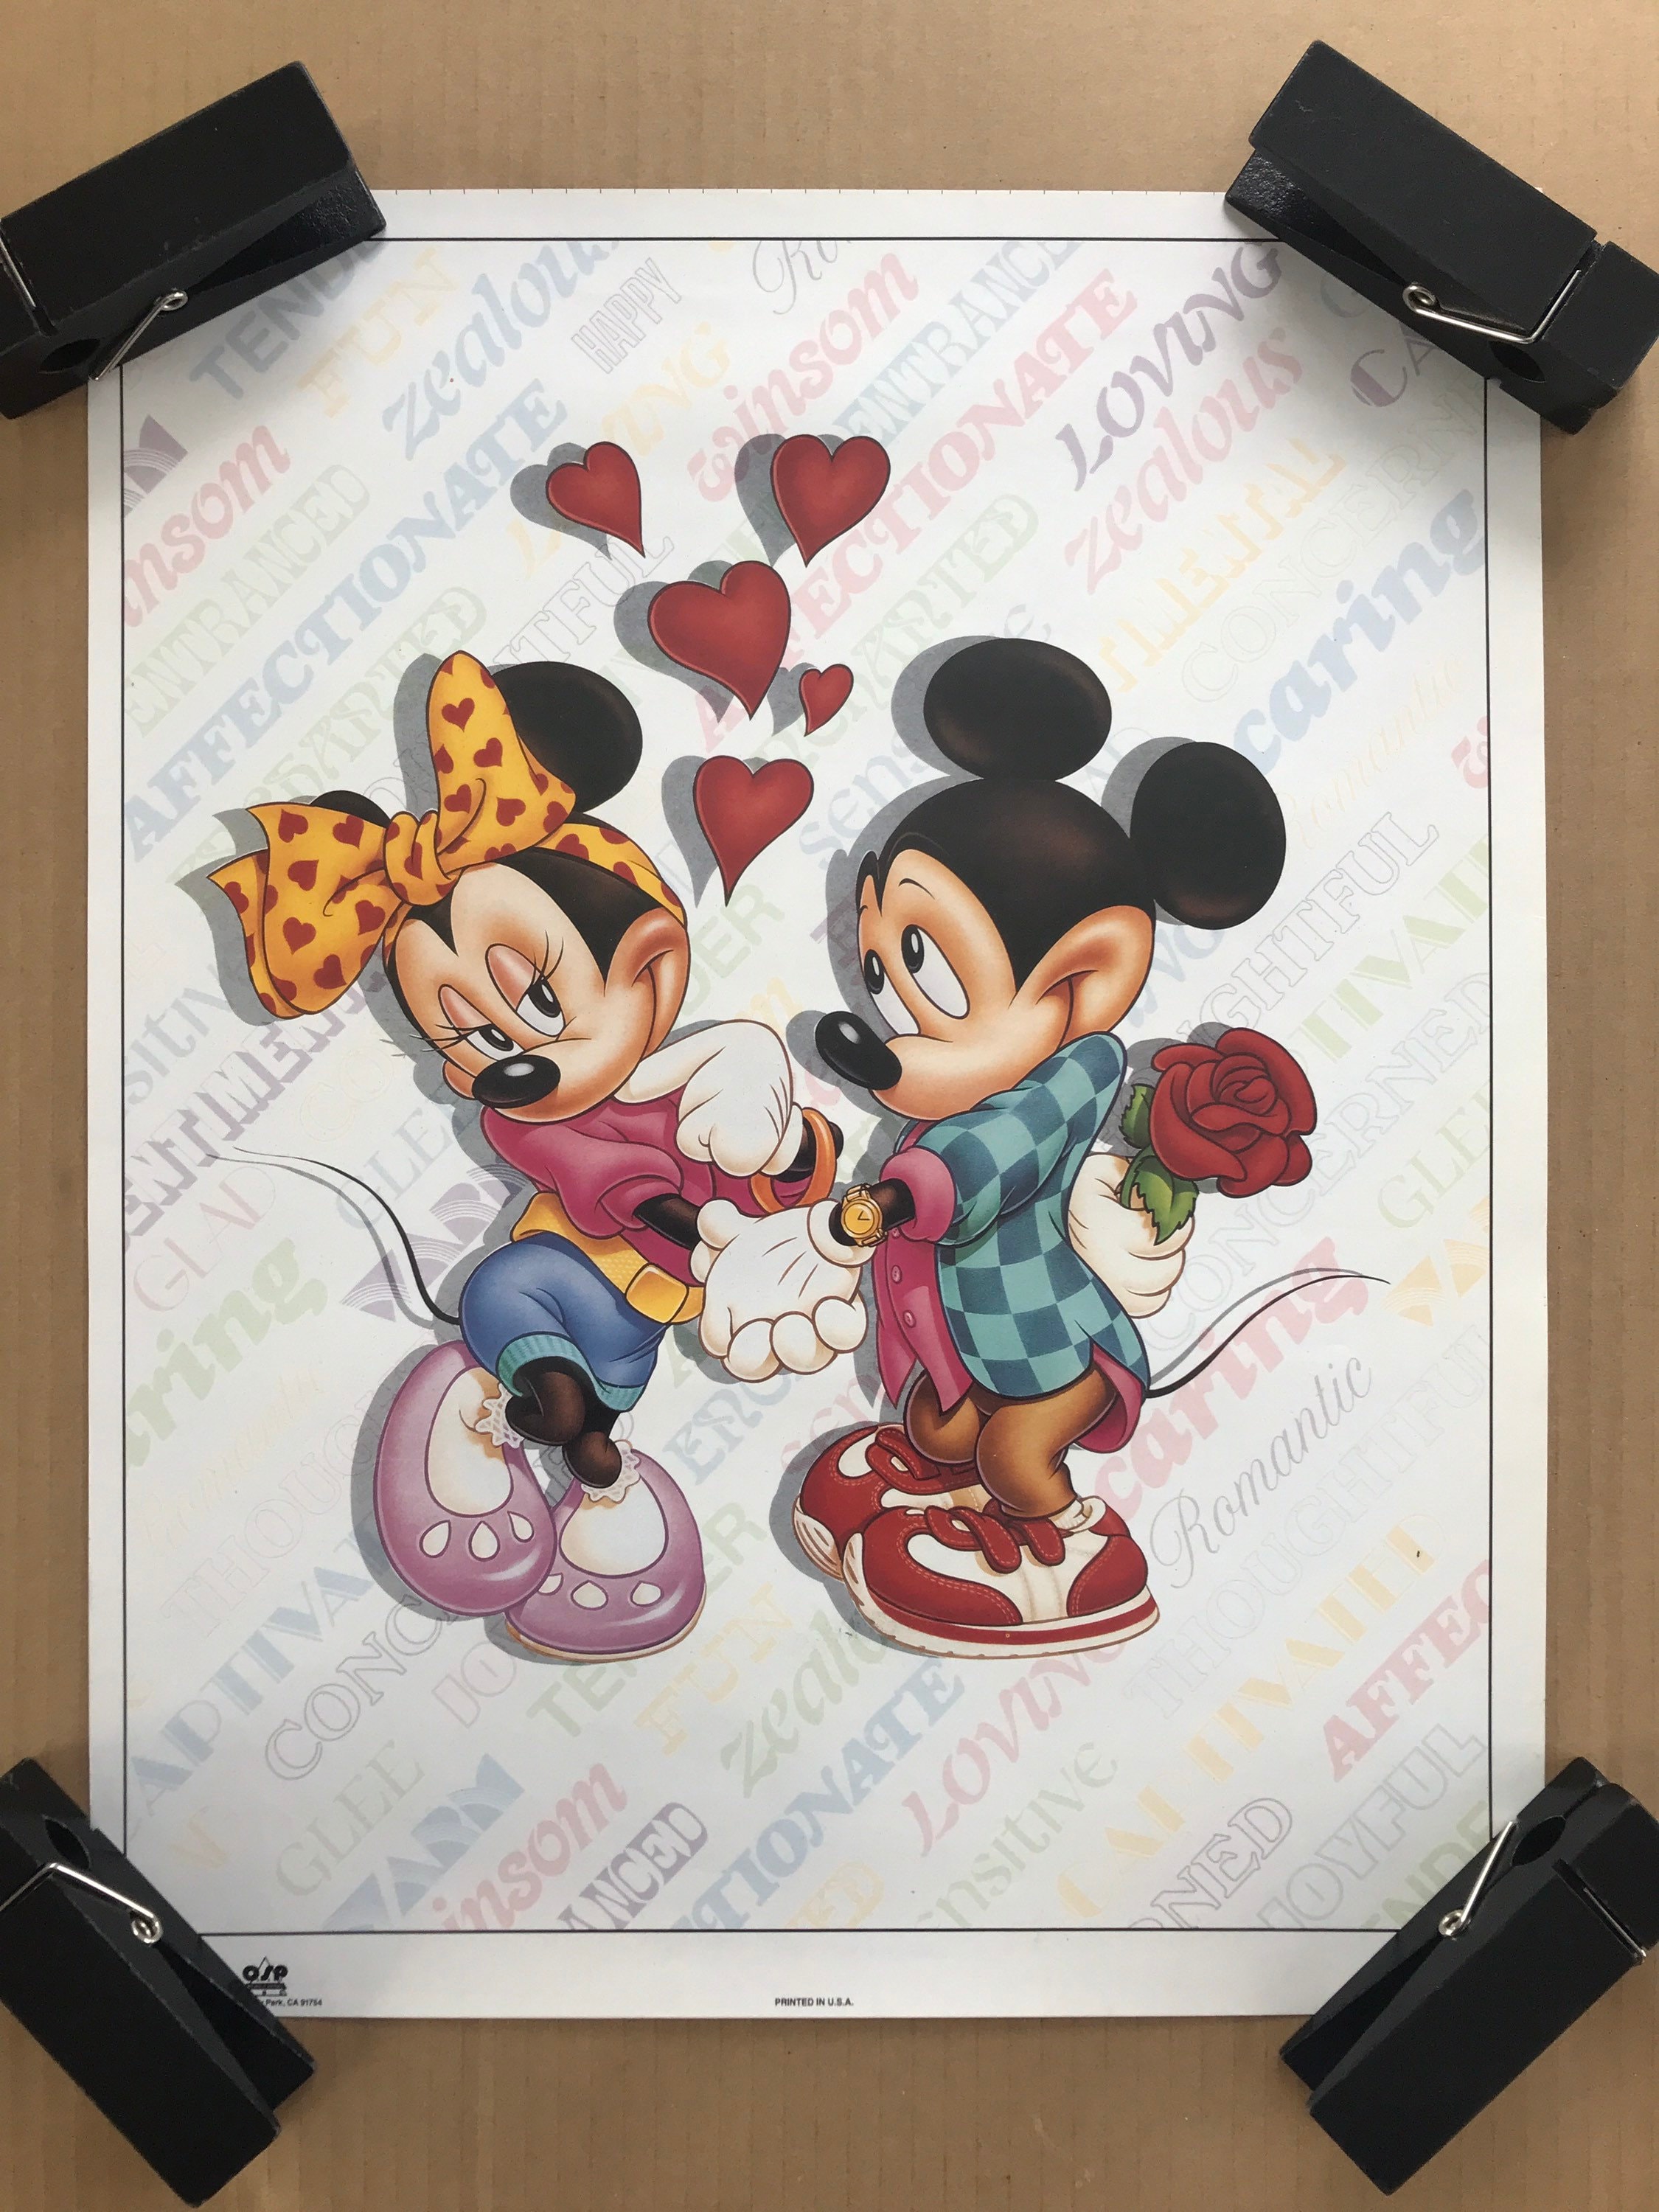 Vintage Original Mickey and Minnie Mouse Pinup Poster Love Hearts